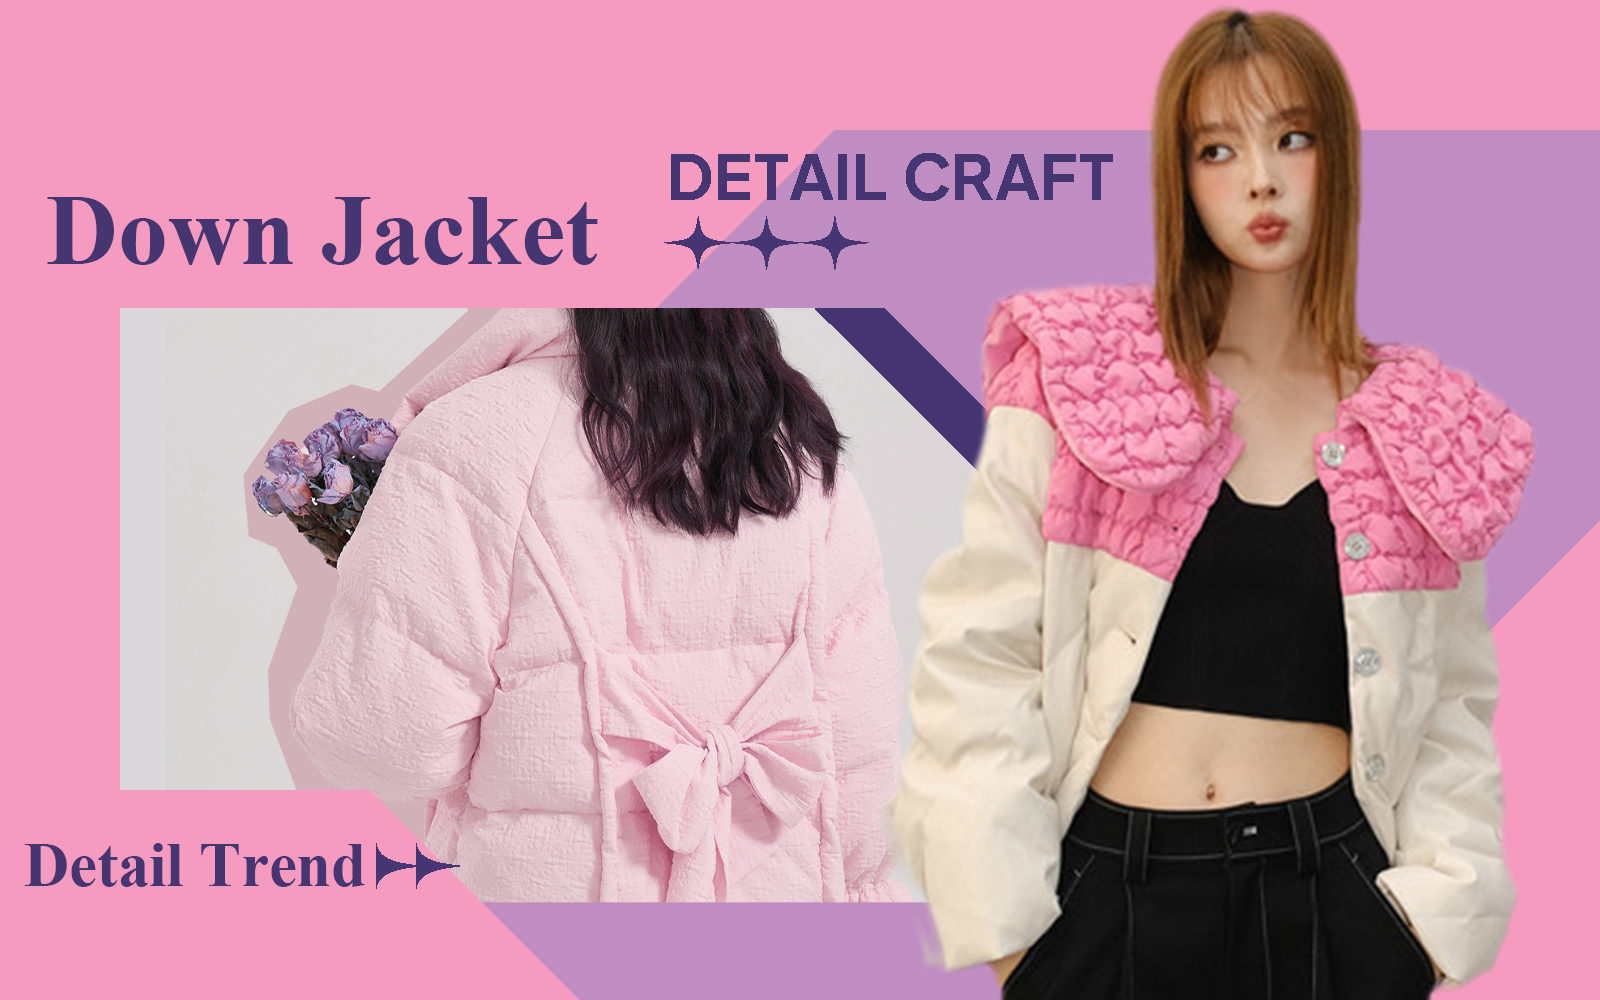 Partial Decoration -- The Detail & Craft Trend for Women's Down Jacket